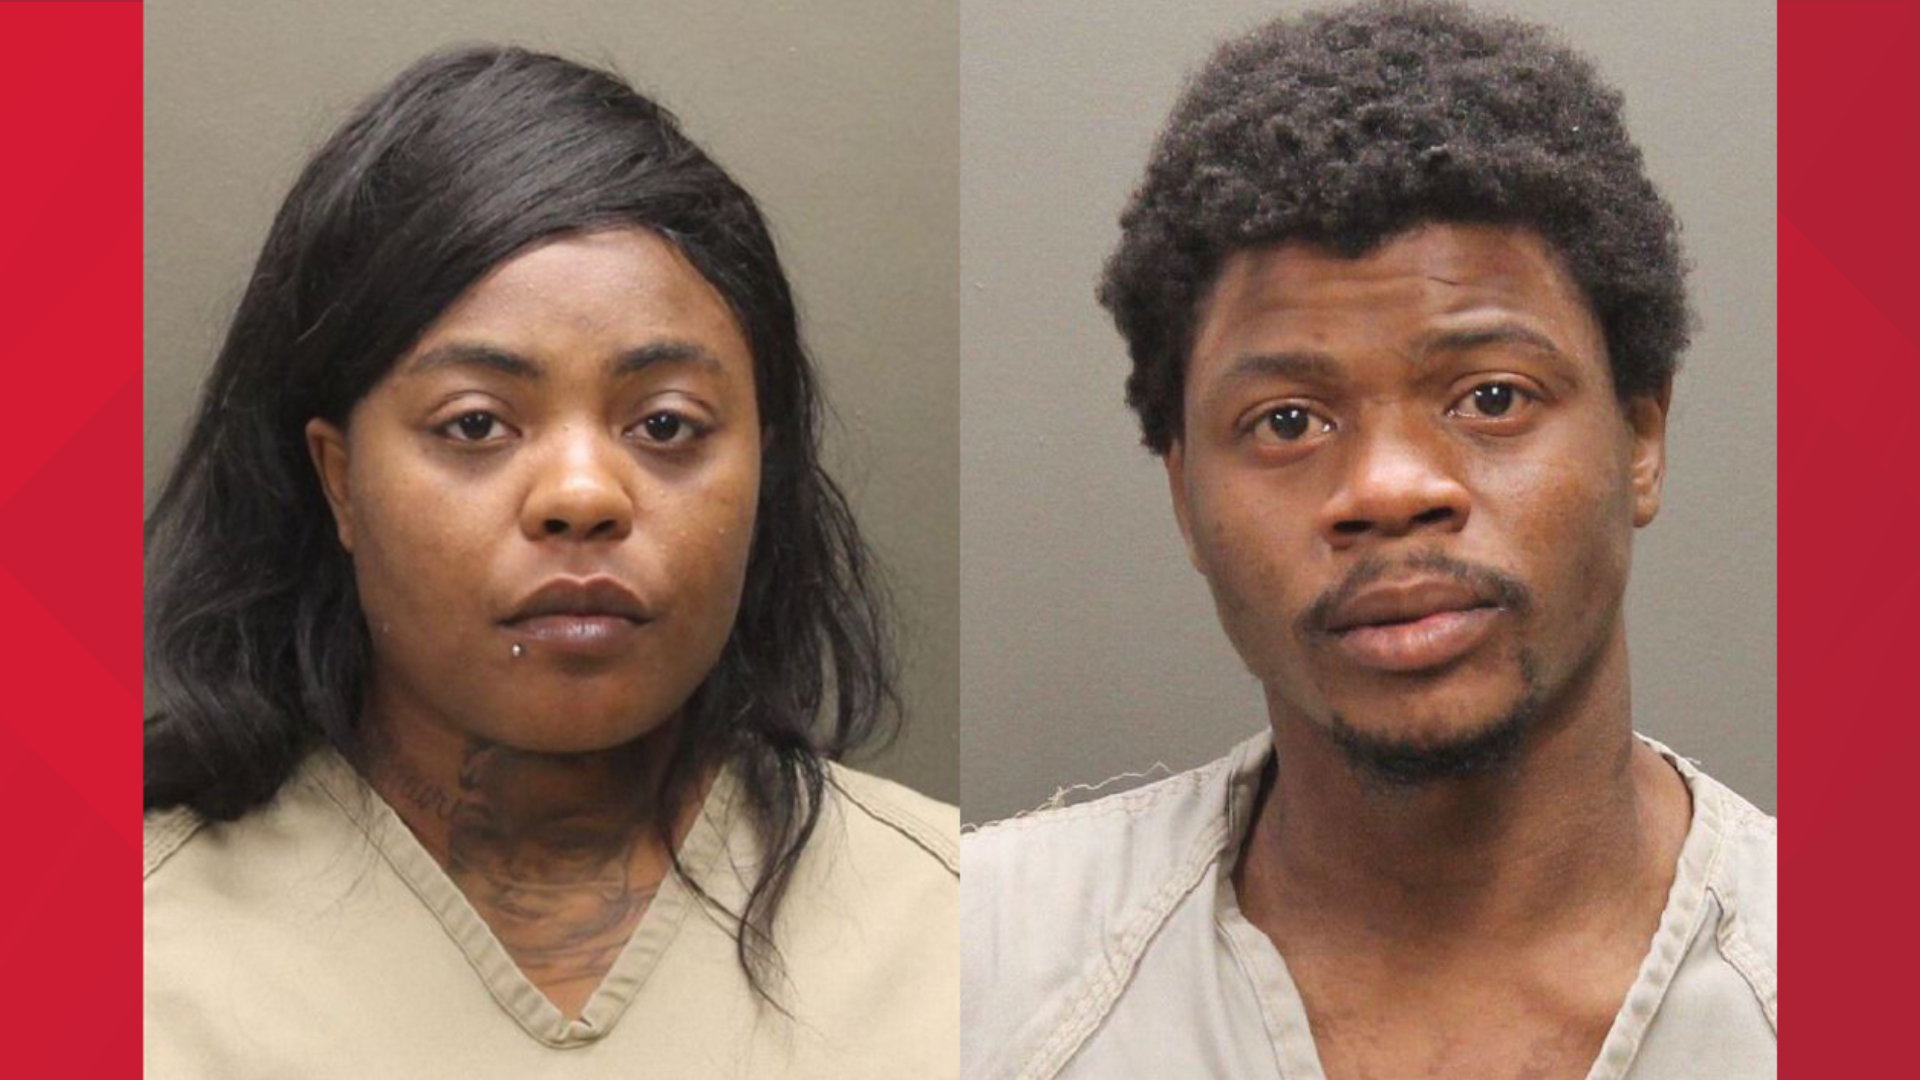 The Columbus Division of Police has charged two people with murder in connection to a July shooting in the south Franklinton area.